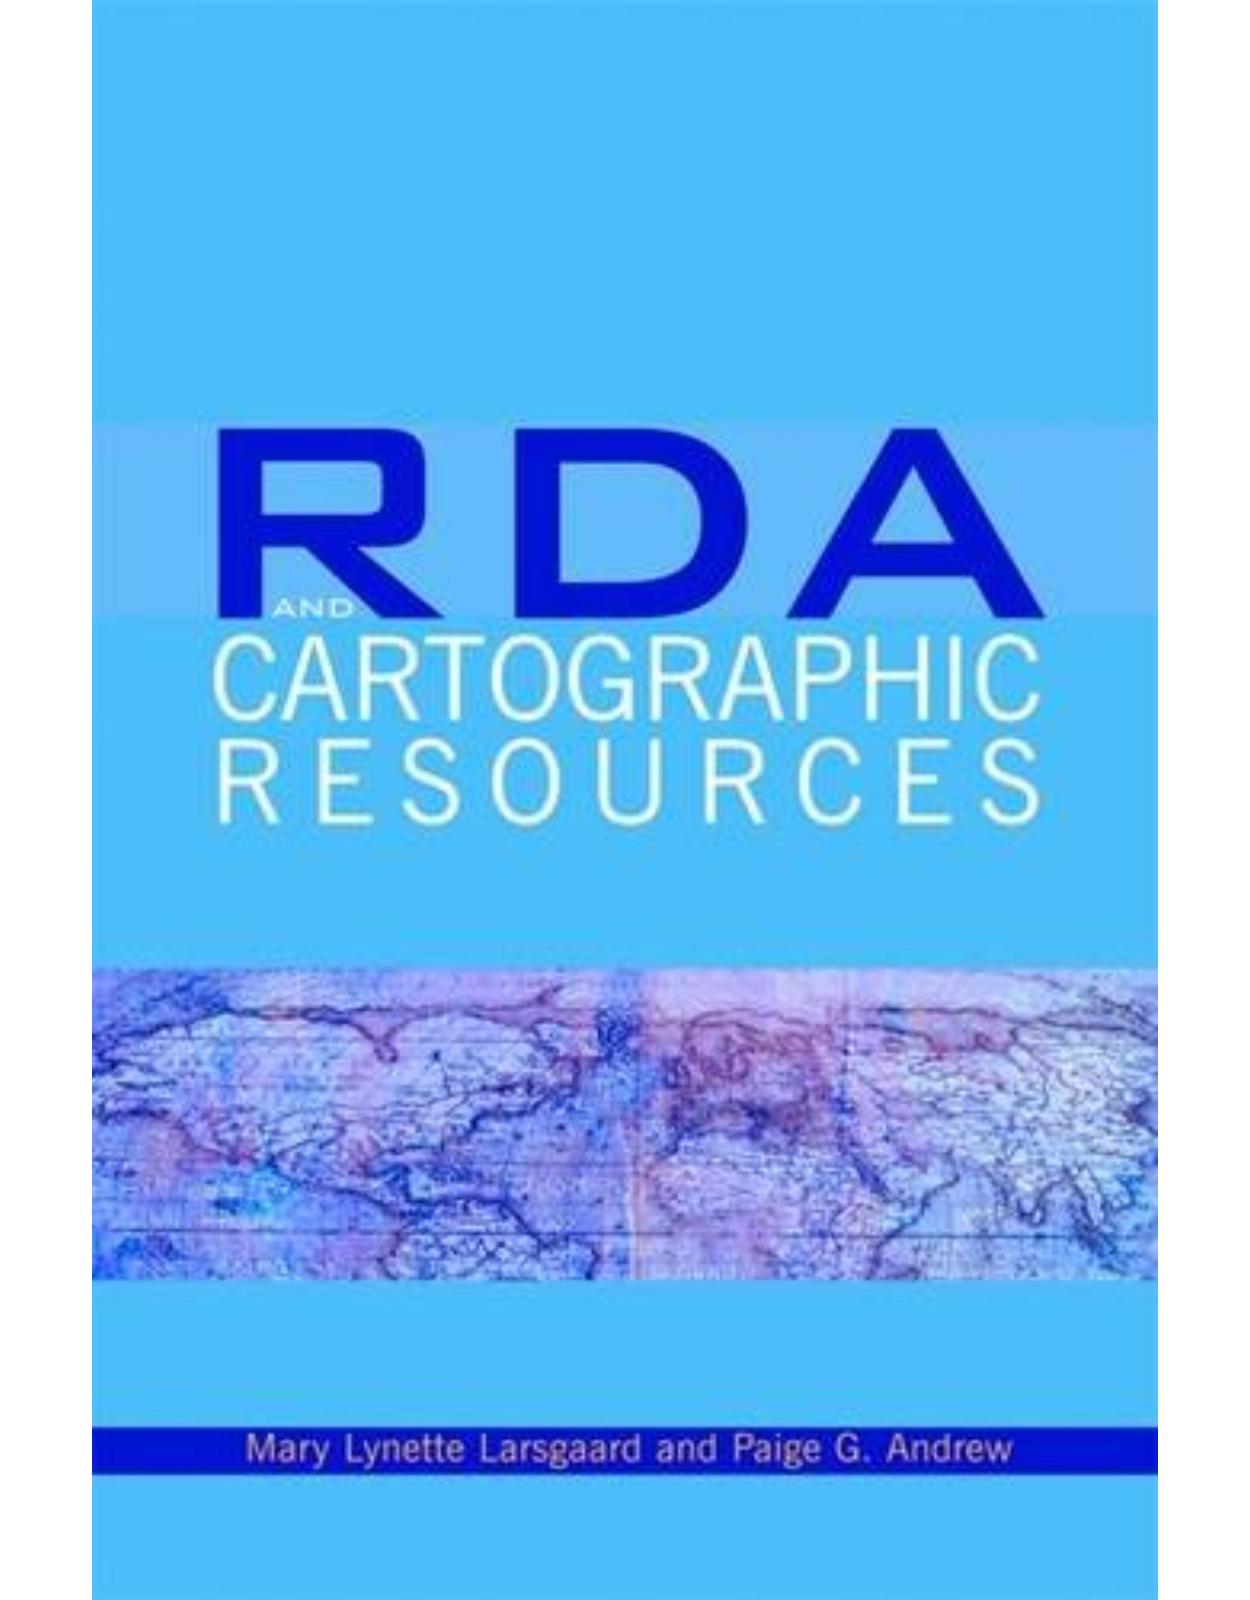 RDA and Cartographic Resources